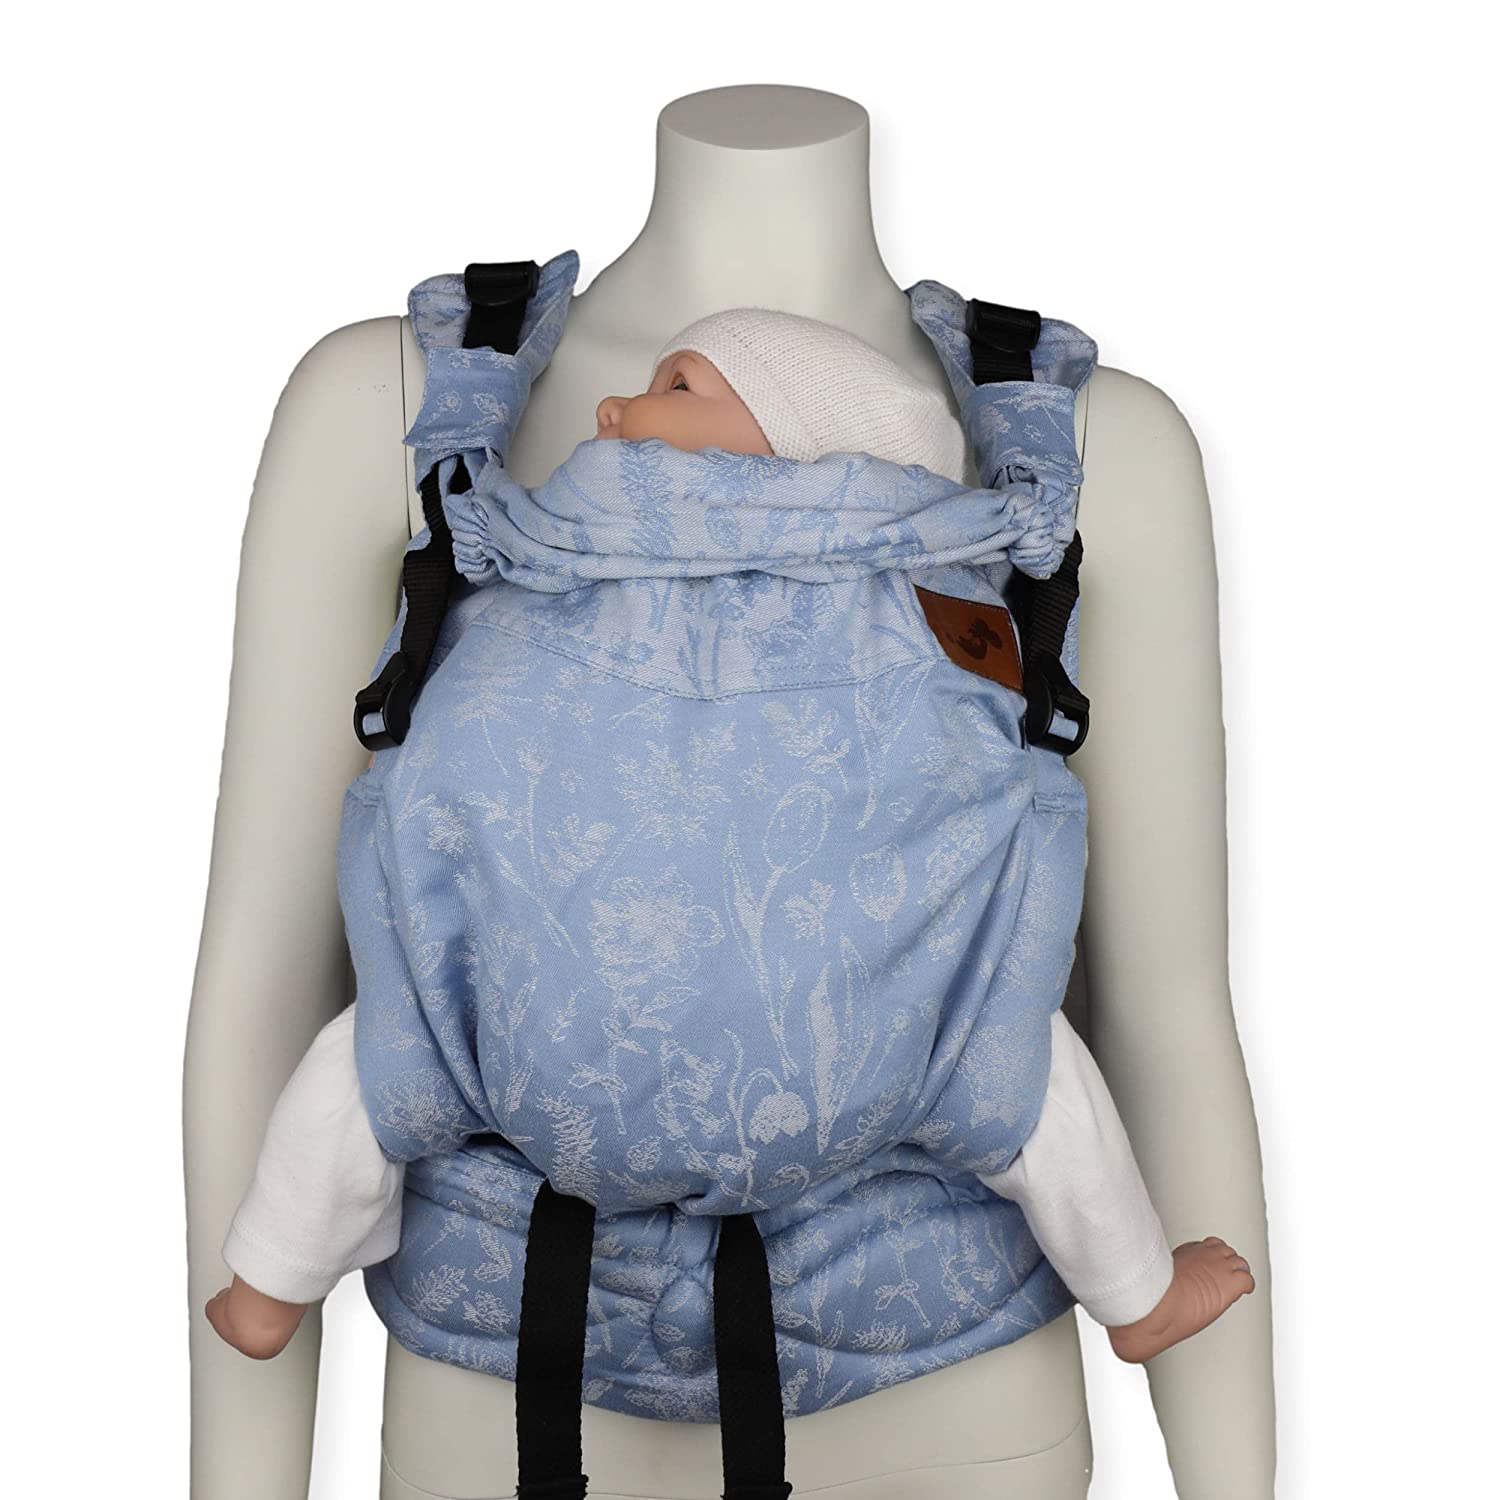 Schmusewolke Comfort Maxi FullBuckle - Baby Carrier for Babies and Toddlers (10-24 Months, 6-16 kg) - Organic Cotton with Linen - Fleur Provence